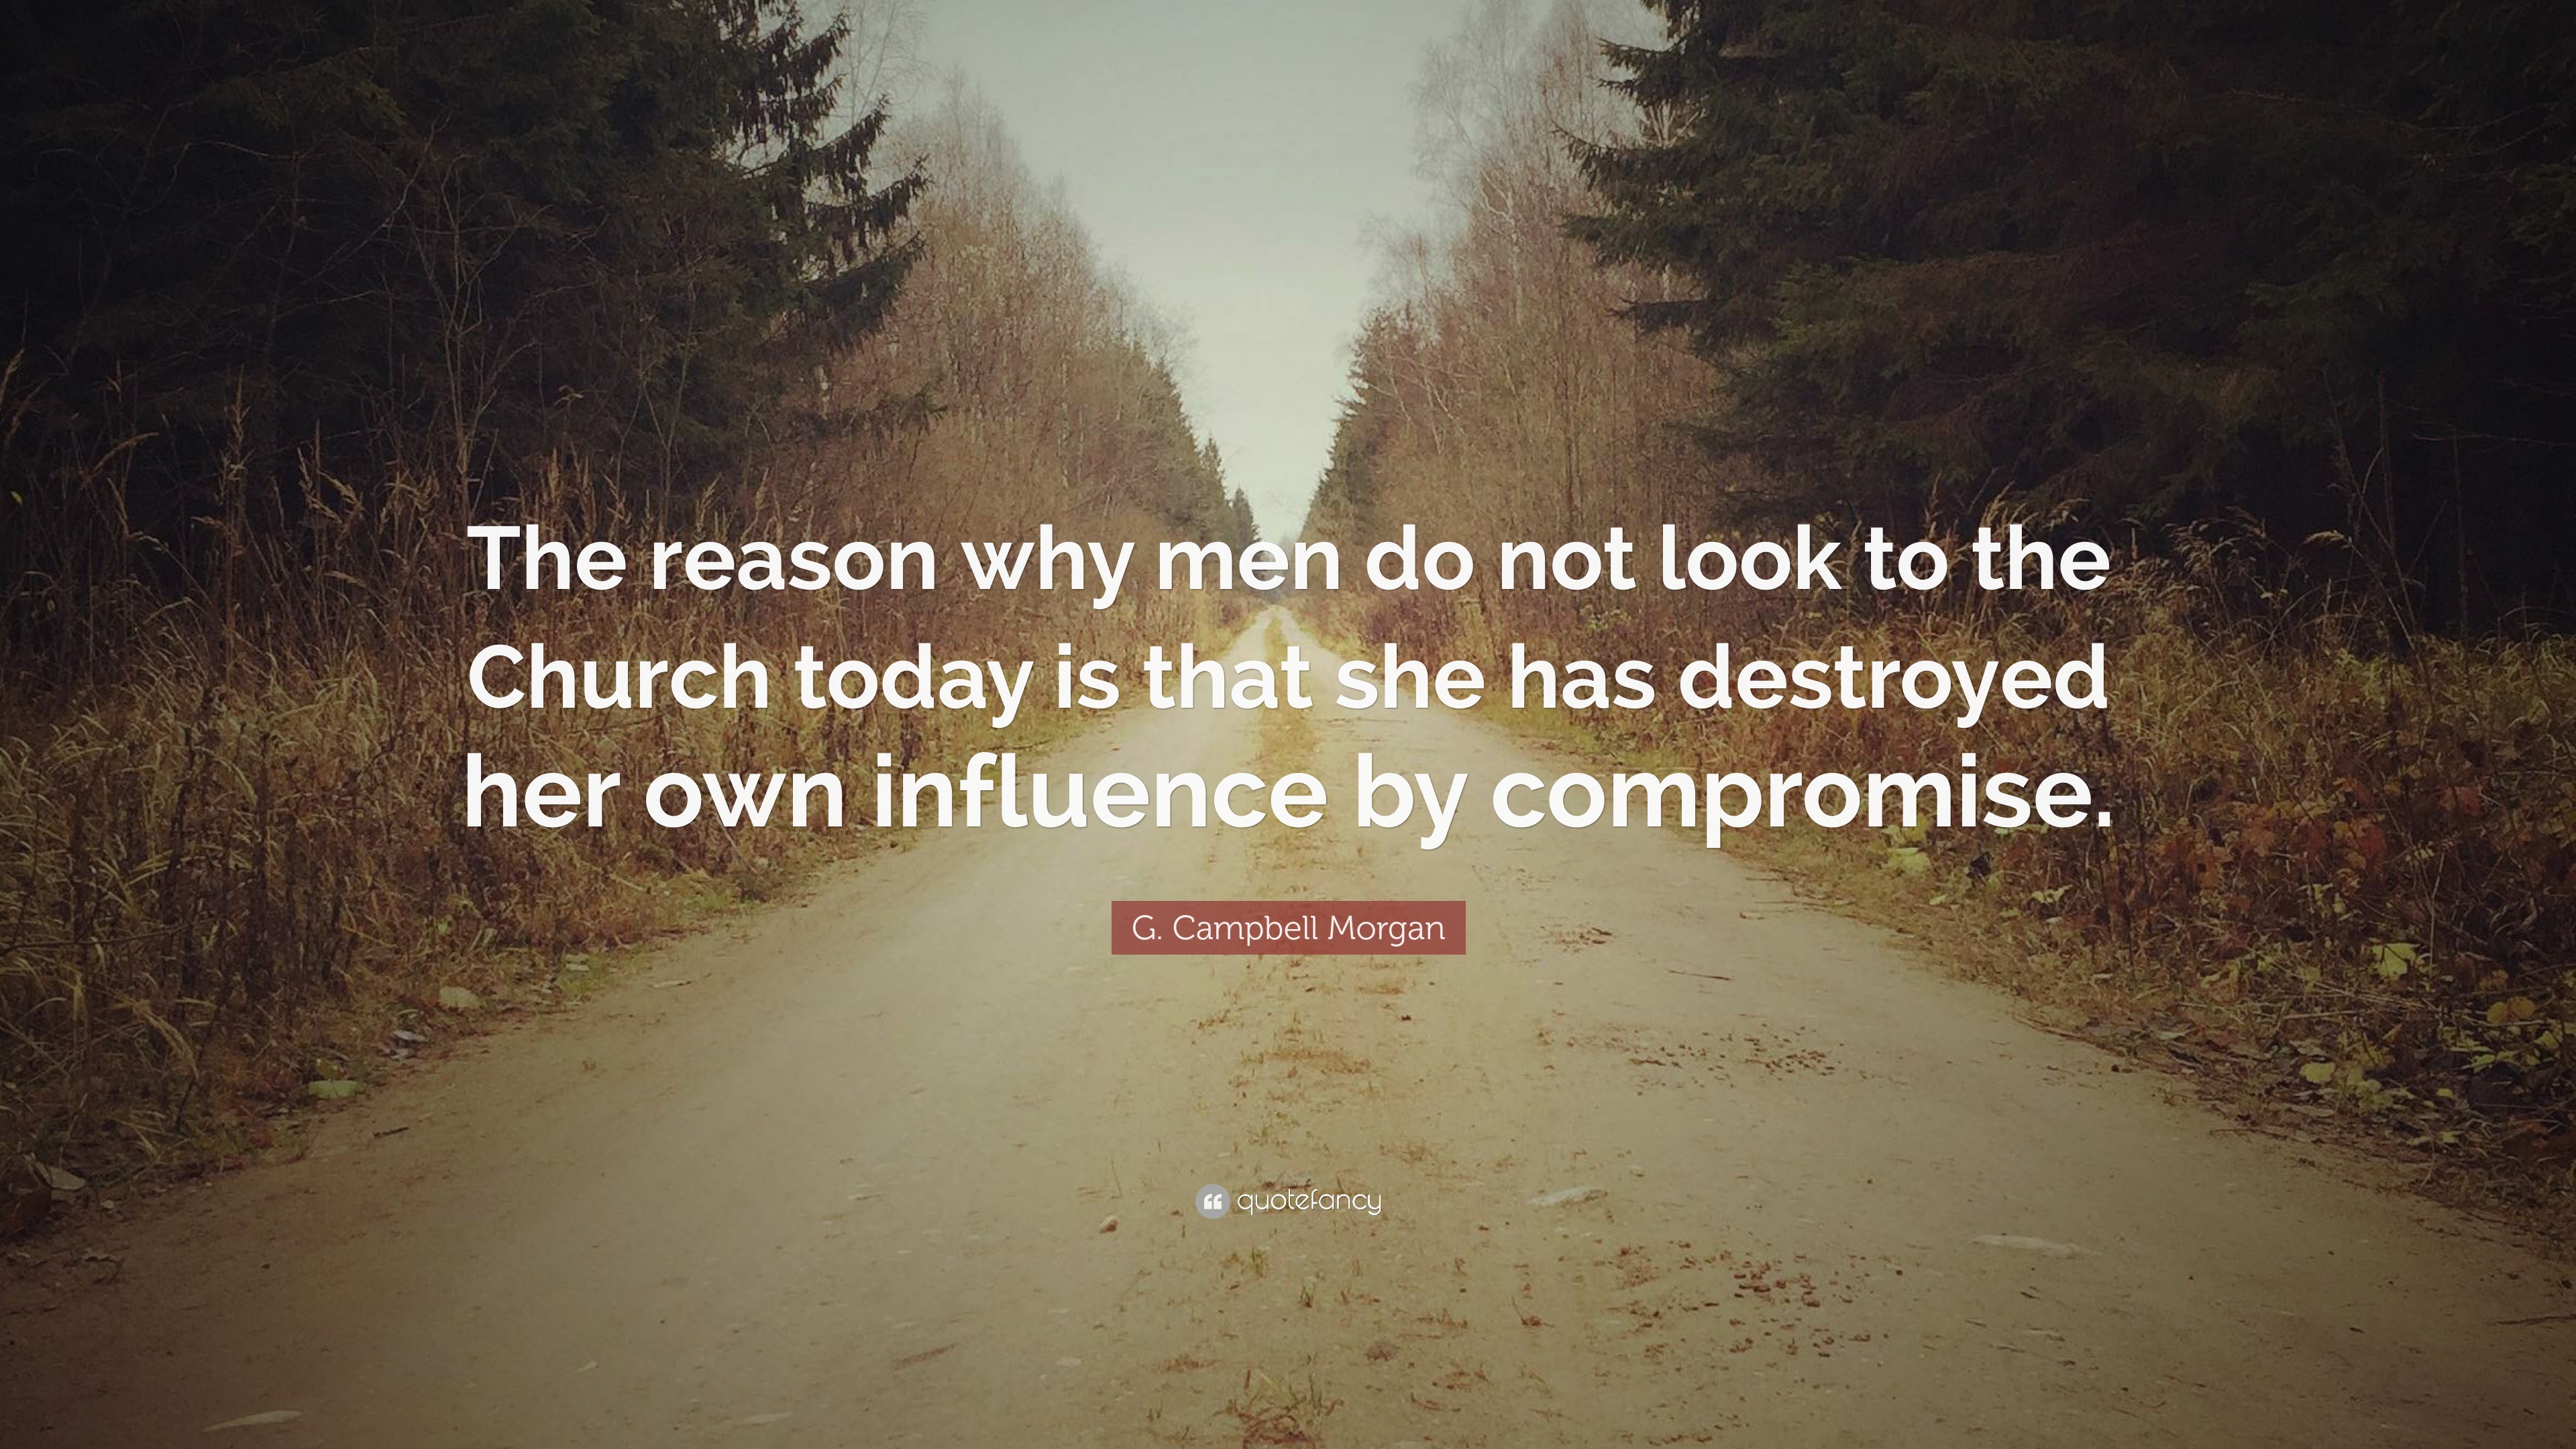 The No-Compromise Man And the No-Compromise Church